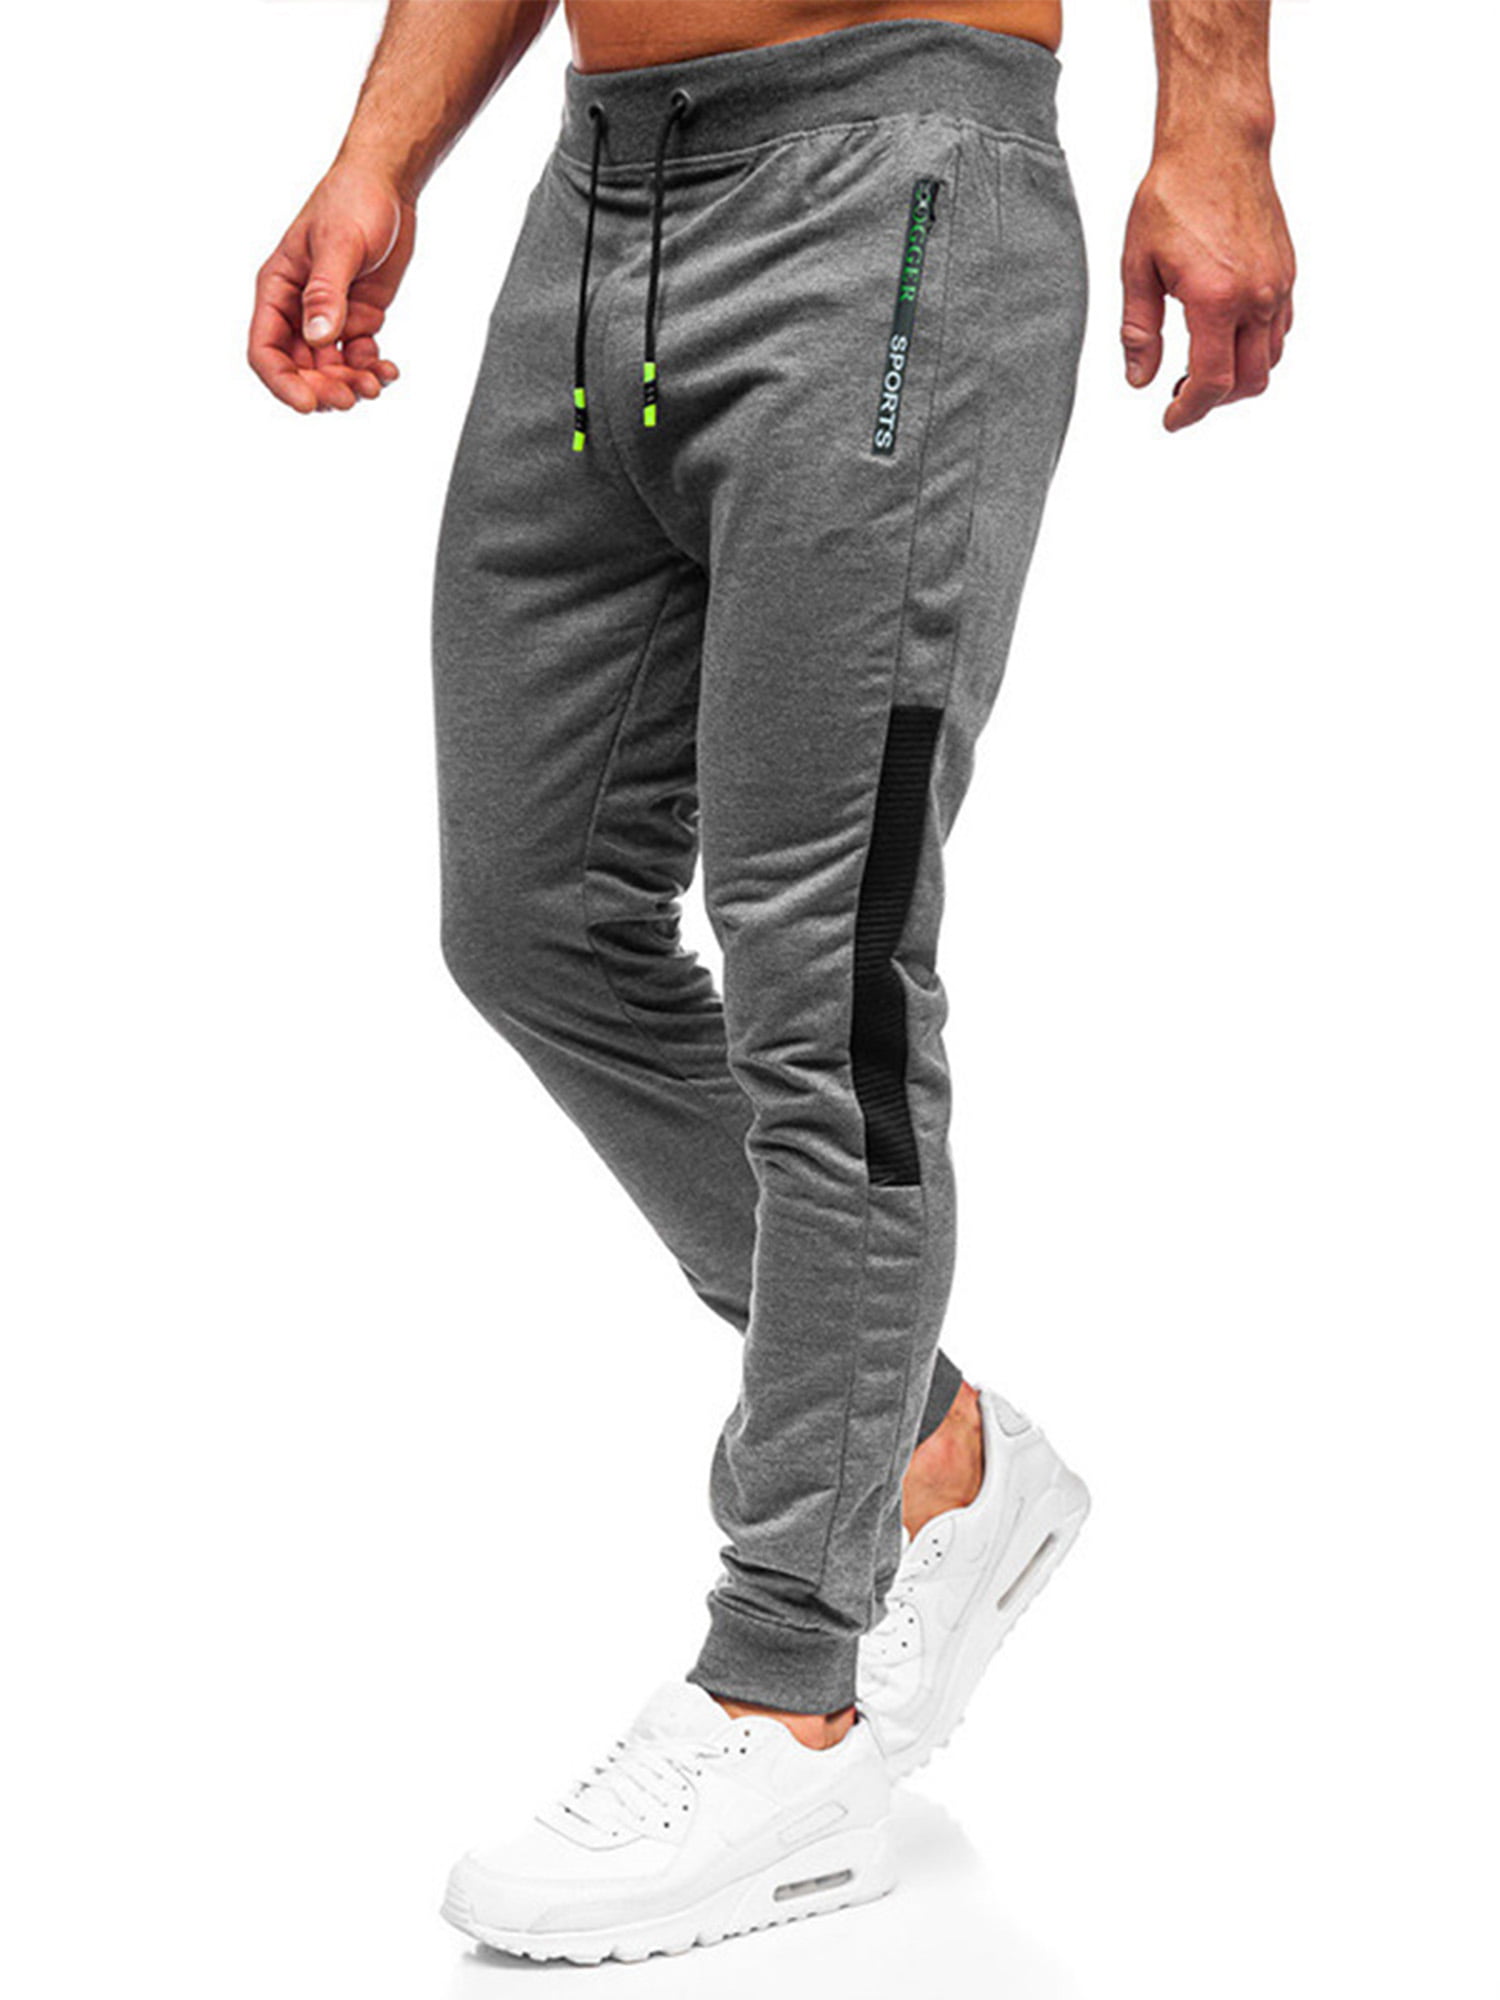 CAMEL CROWN Womens Jogger Pants with Pockets Soft Elasticated Sweatpants Lounge Trousers for Gym Jogging Training